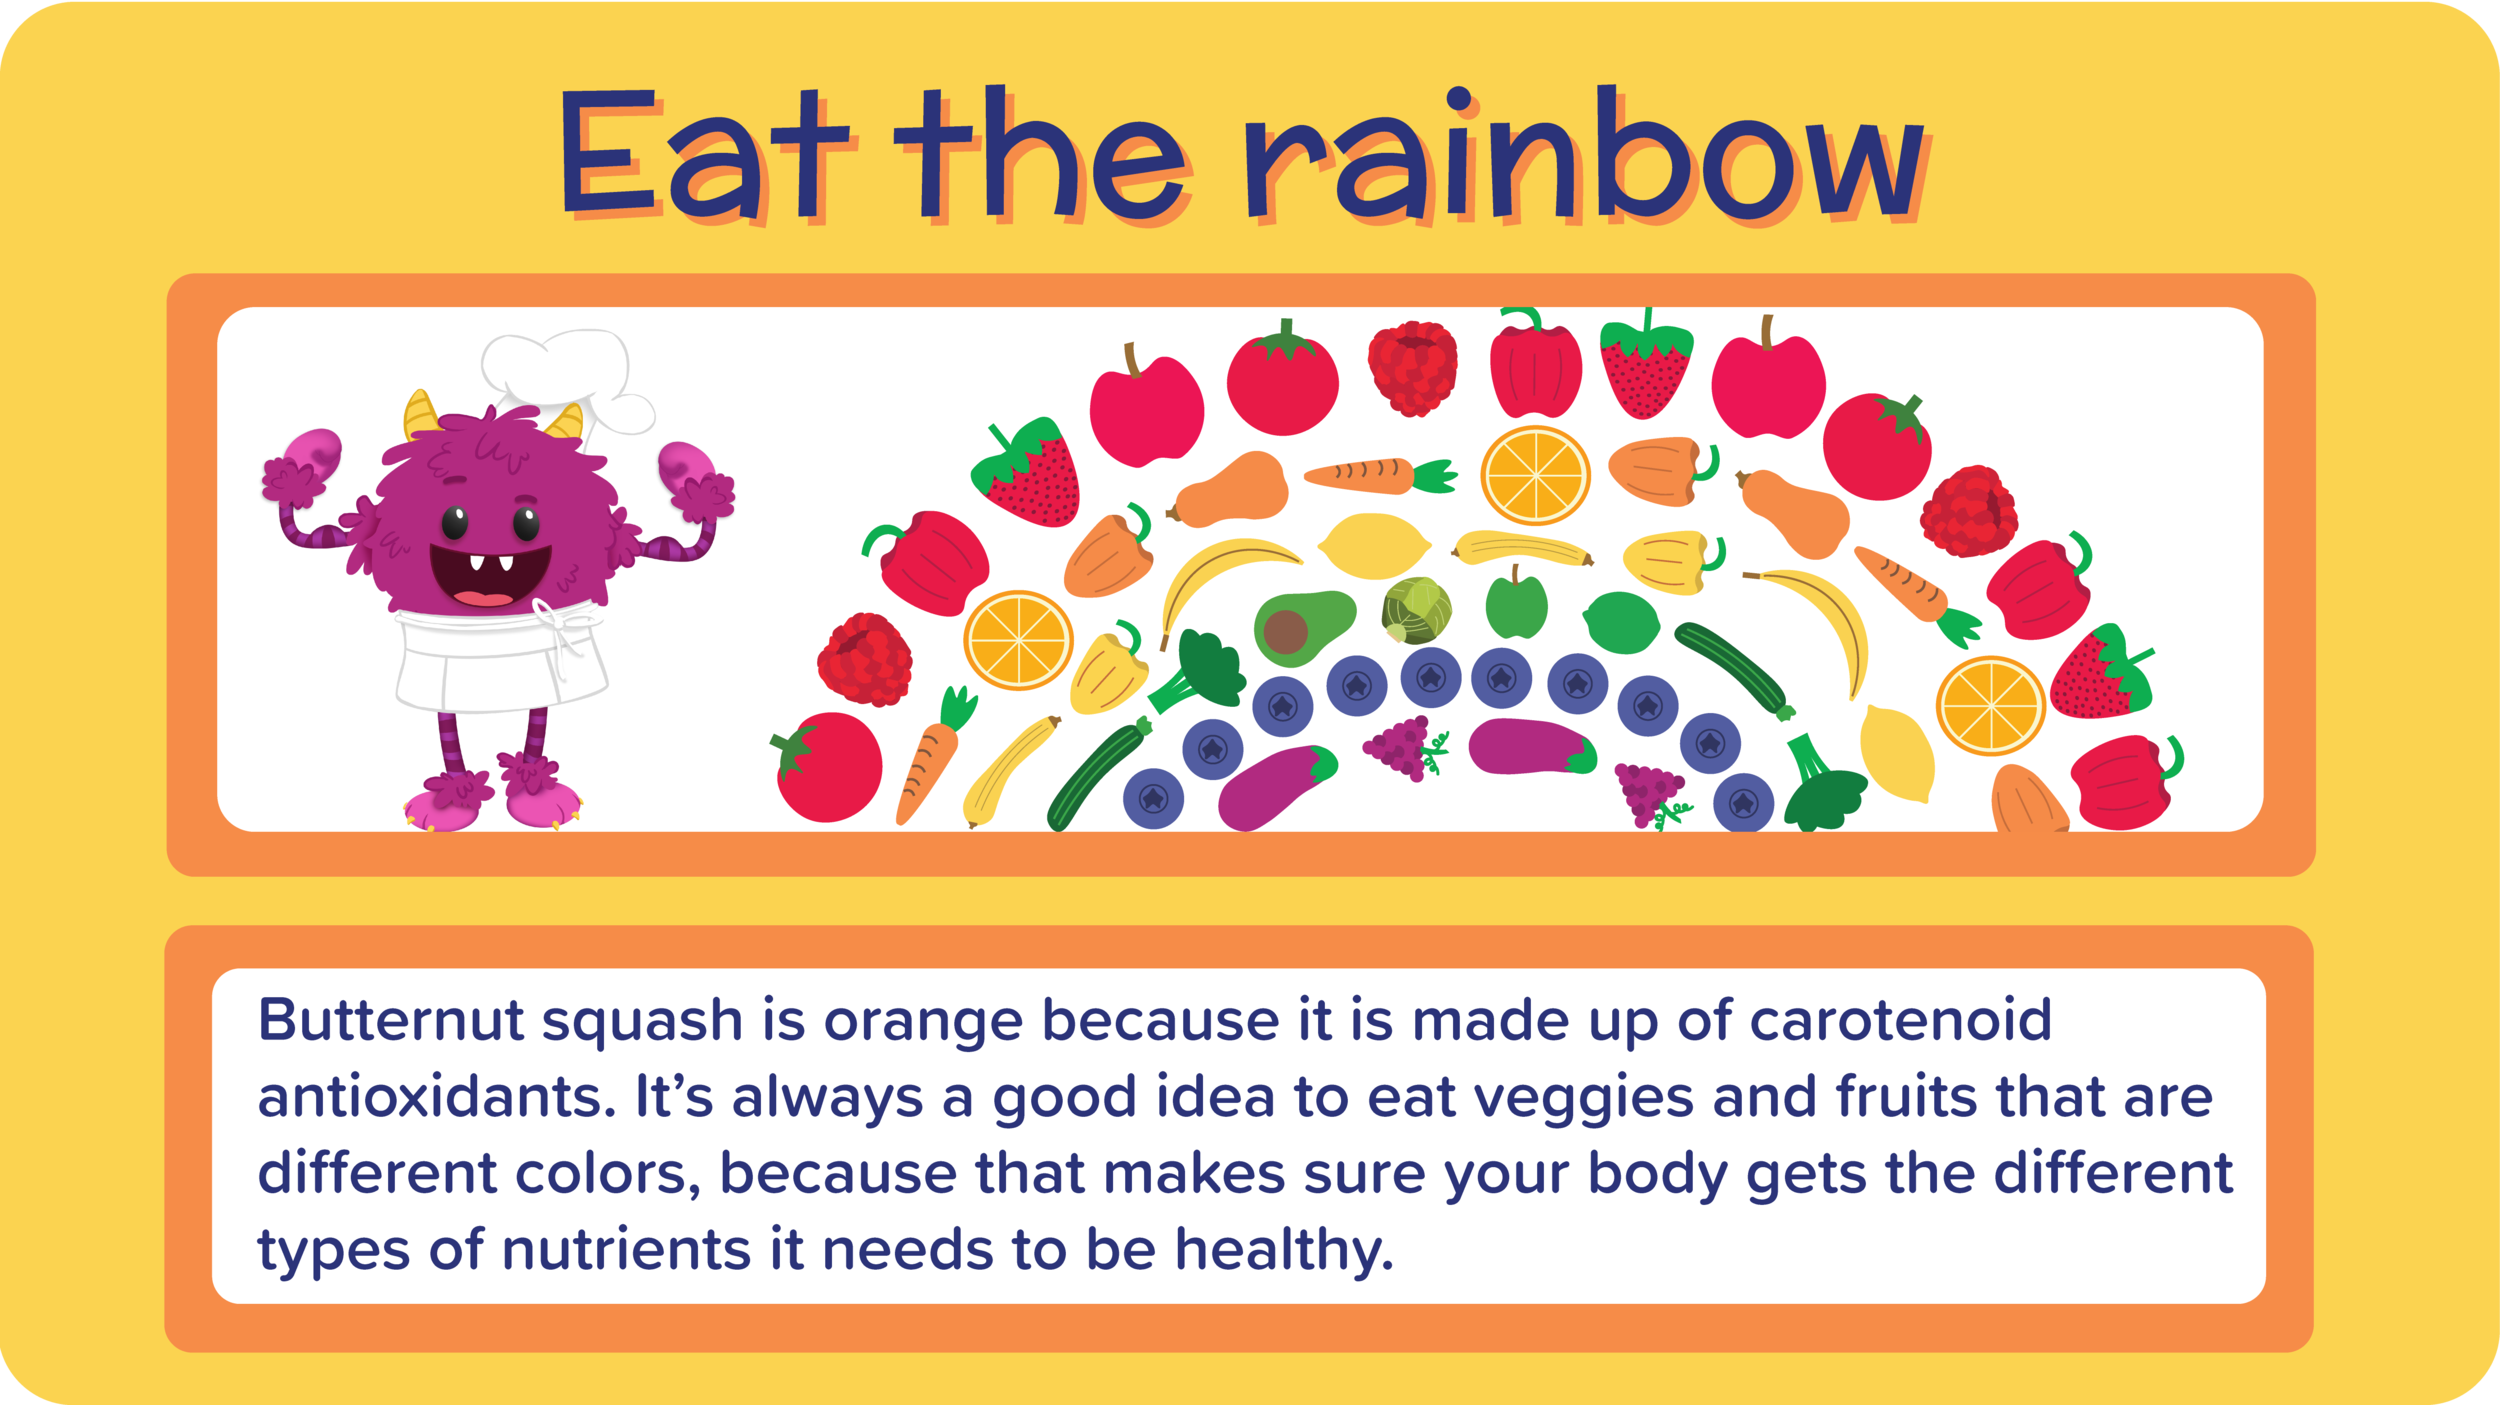 12_ChickenFingersButternutBrussels_eat the rainbow-01.png